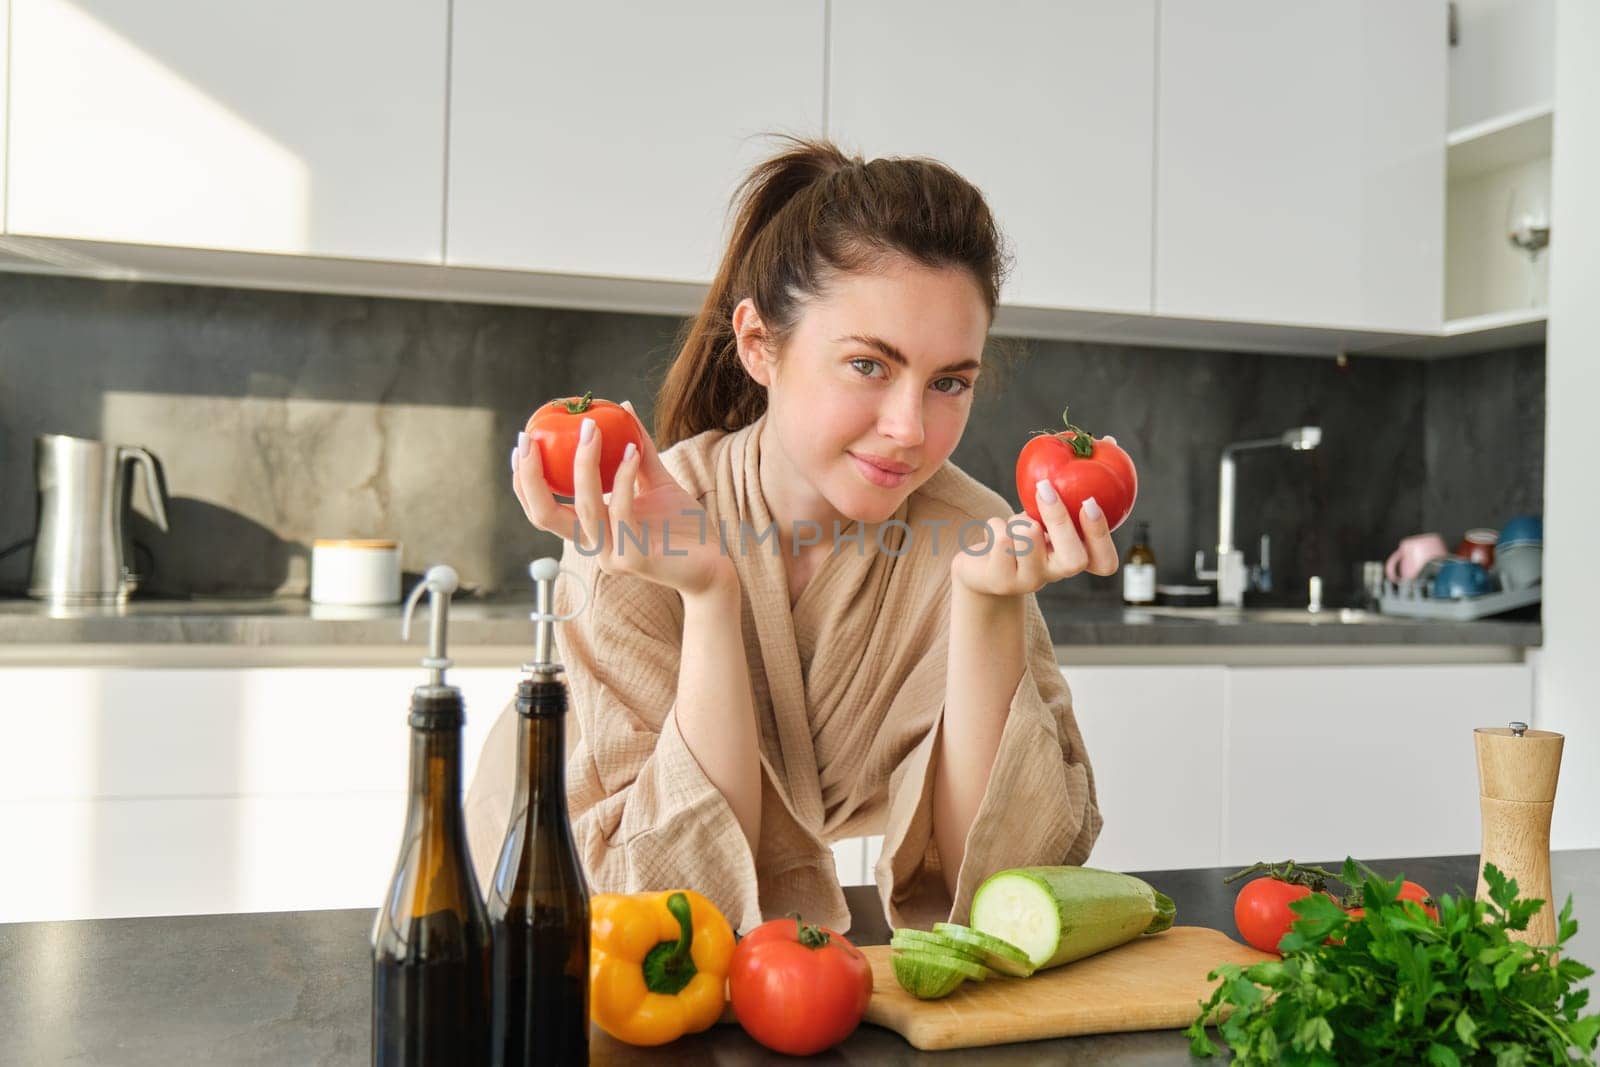 Portrait of woman cooking at home in the kitchen, holding tomatoes, preparing delicious fresh meal with vegetables, standing near chopping board.